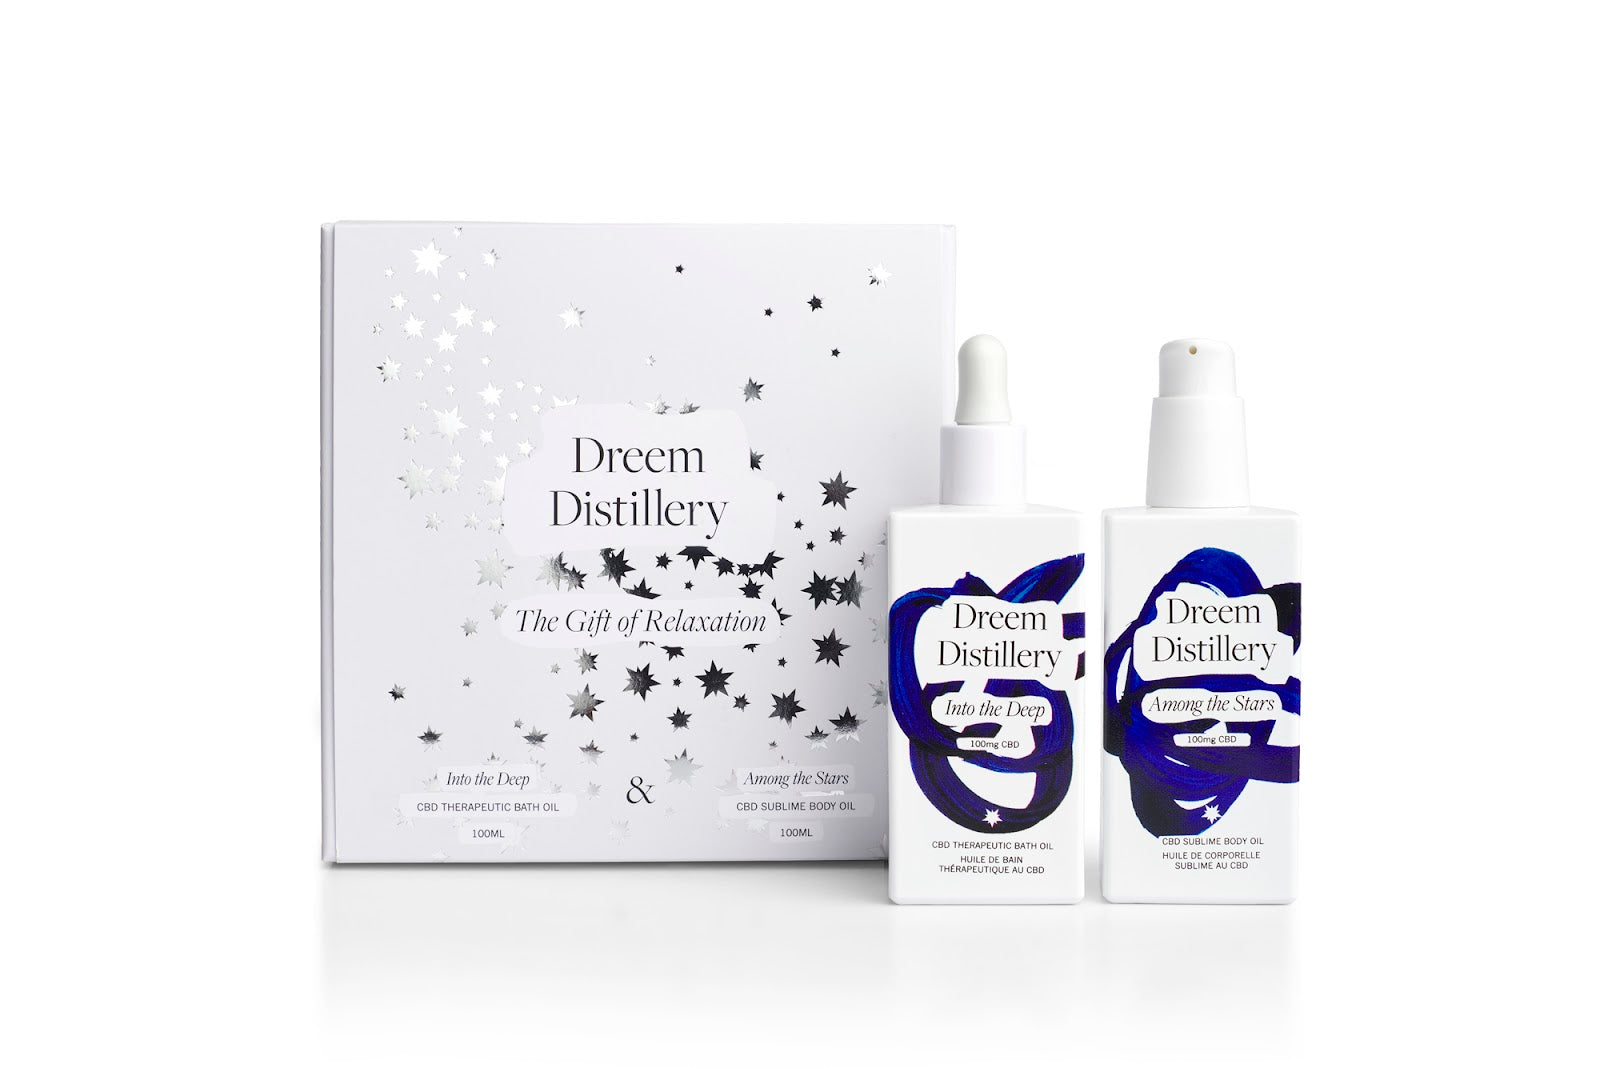 Dreem Distillery The Gift of Relaxation Set